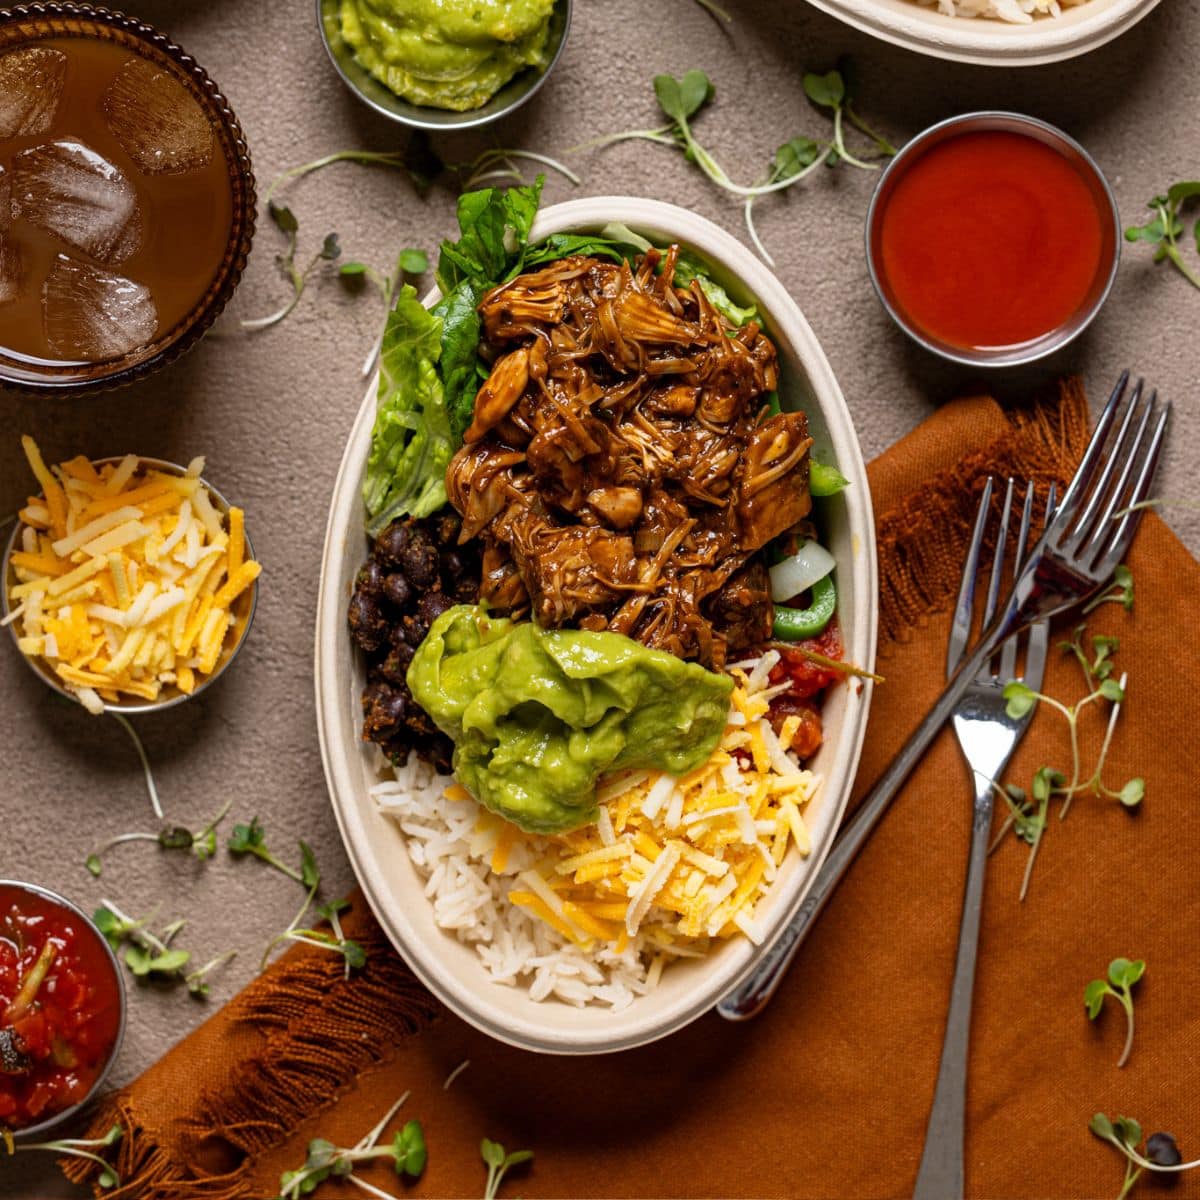 Three burrito bowls with a drink, fork, and condiments.